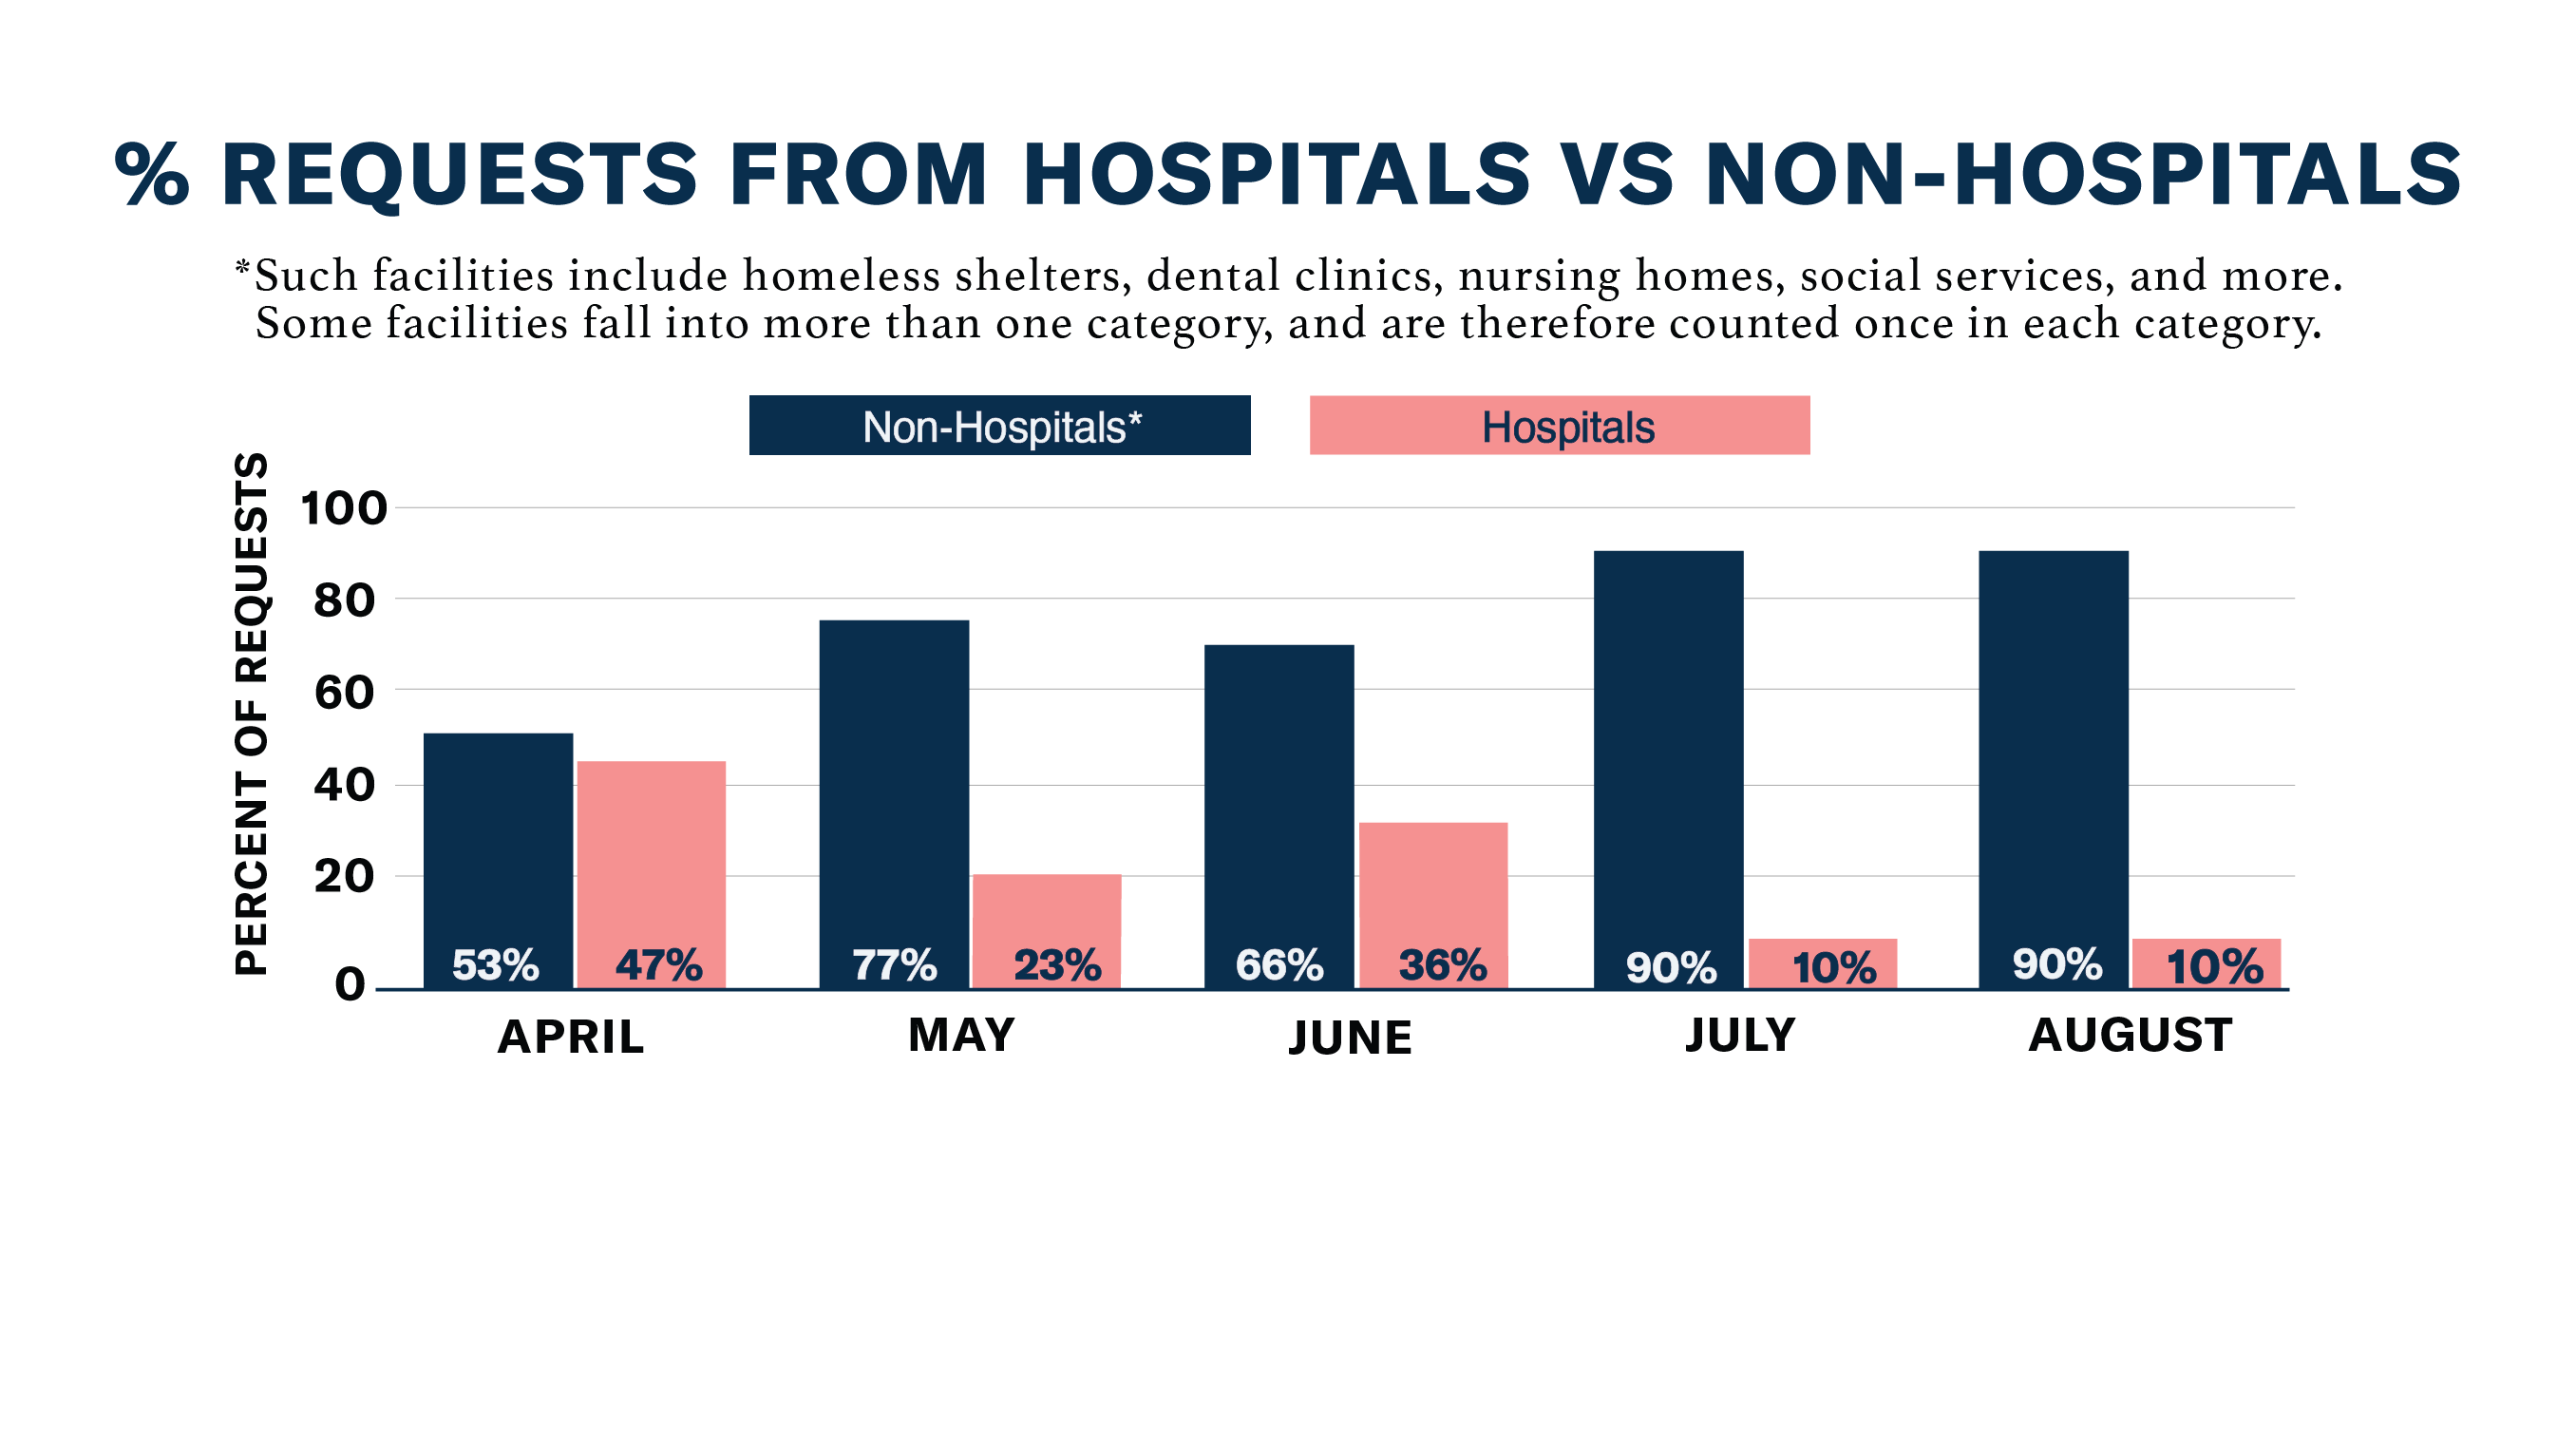 Chart: % Requests from Hospitals vs. Non-Hospitals, August 2020